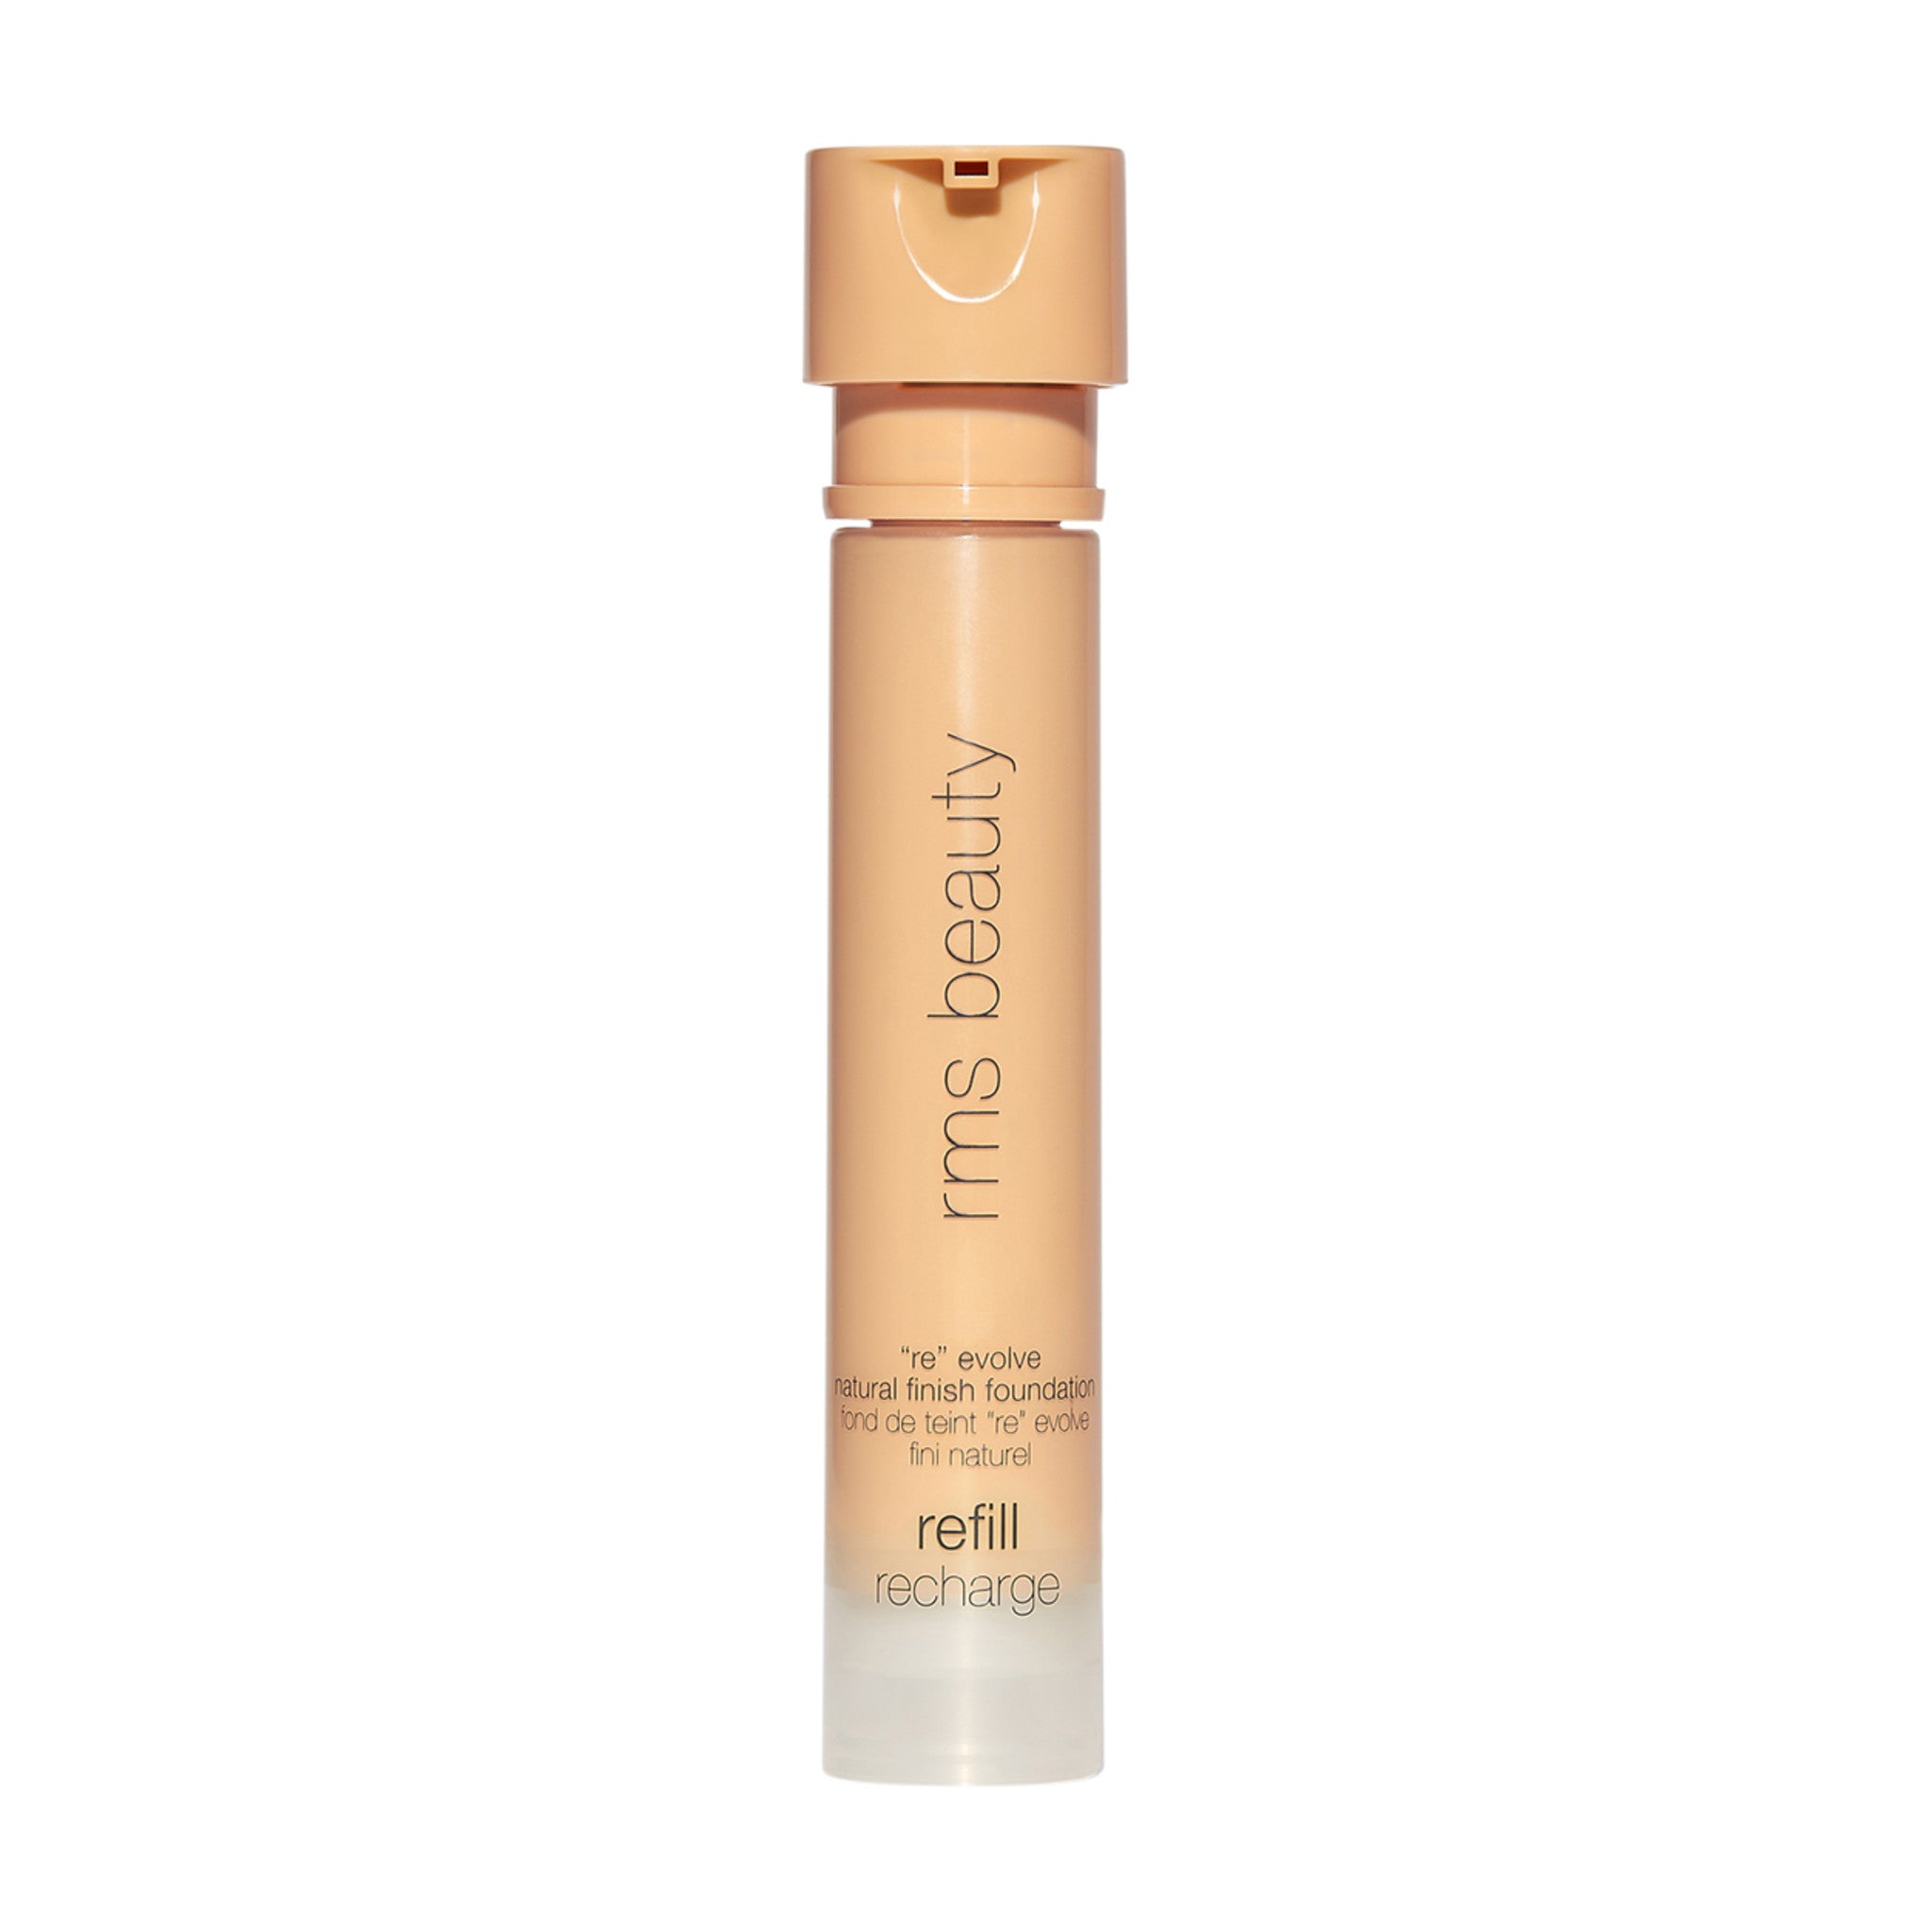 RMS Beauty ReEvolve Natural Finish Foundation Refill Color/Shade variant: 22 main image. This product is for medium cool beige complexions